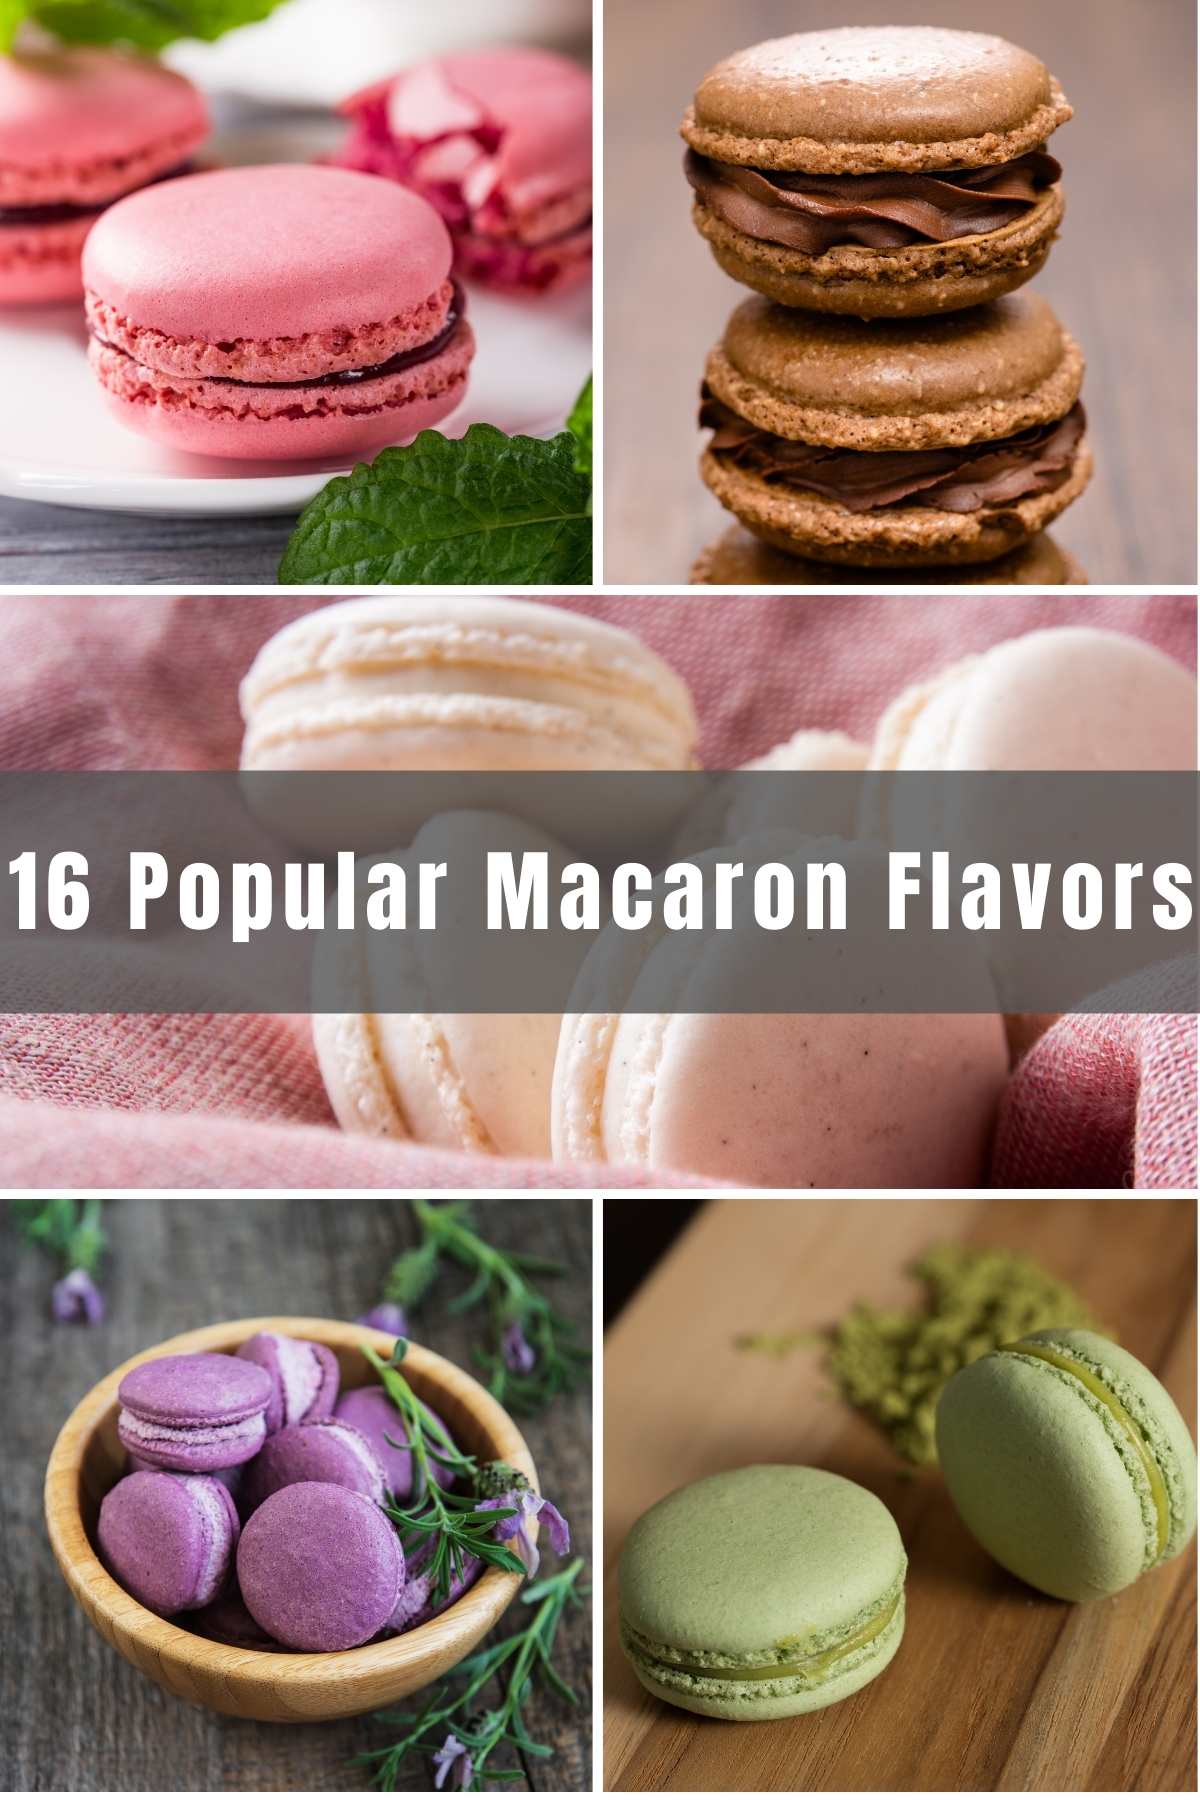 Have you ever enjoyed the sweet taste of a macaron? Not to be confused with macaroons, macarons are a delightful cookie originally from Paris. If you’re curious about these delectable French treasures, keep reading for some information we hope will help, and 16 of the best Macaron Flavors and fillings recipes for you to make at home!